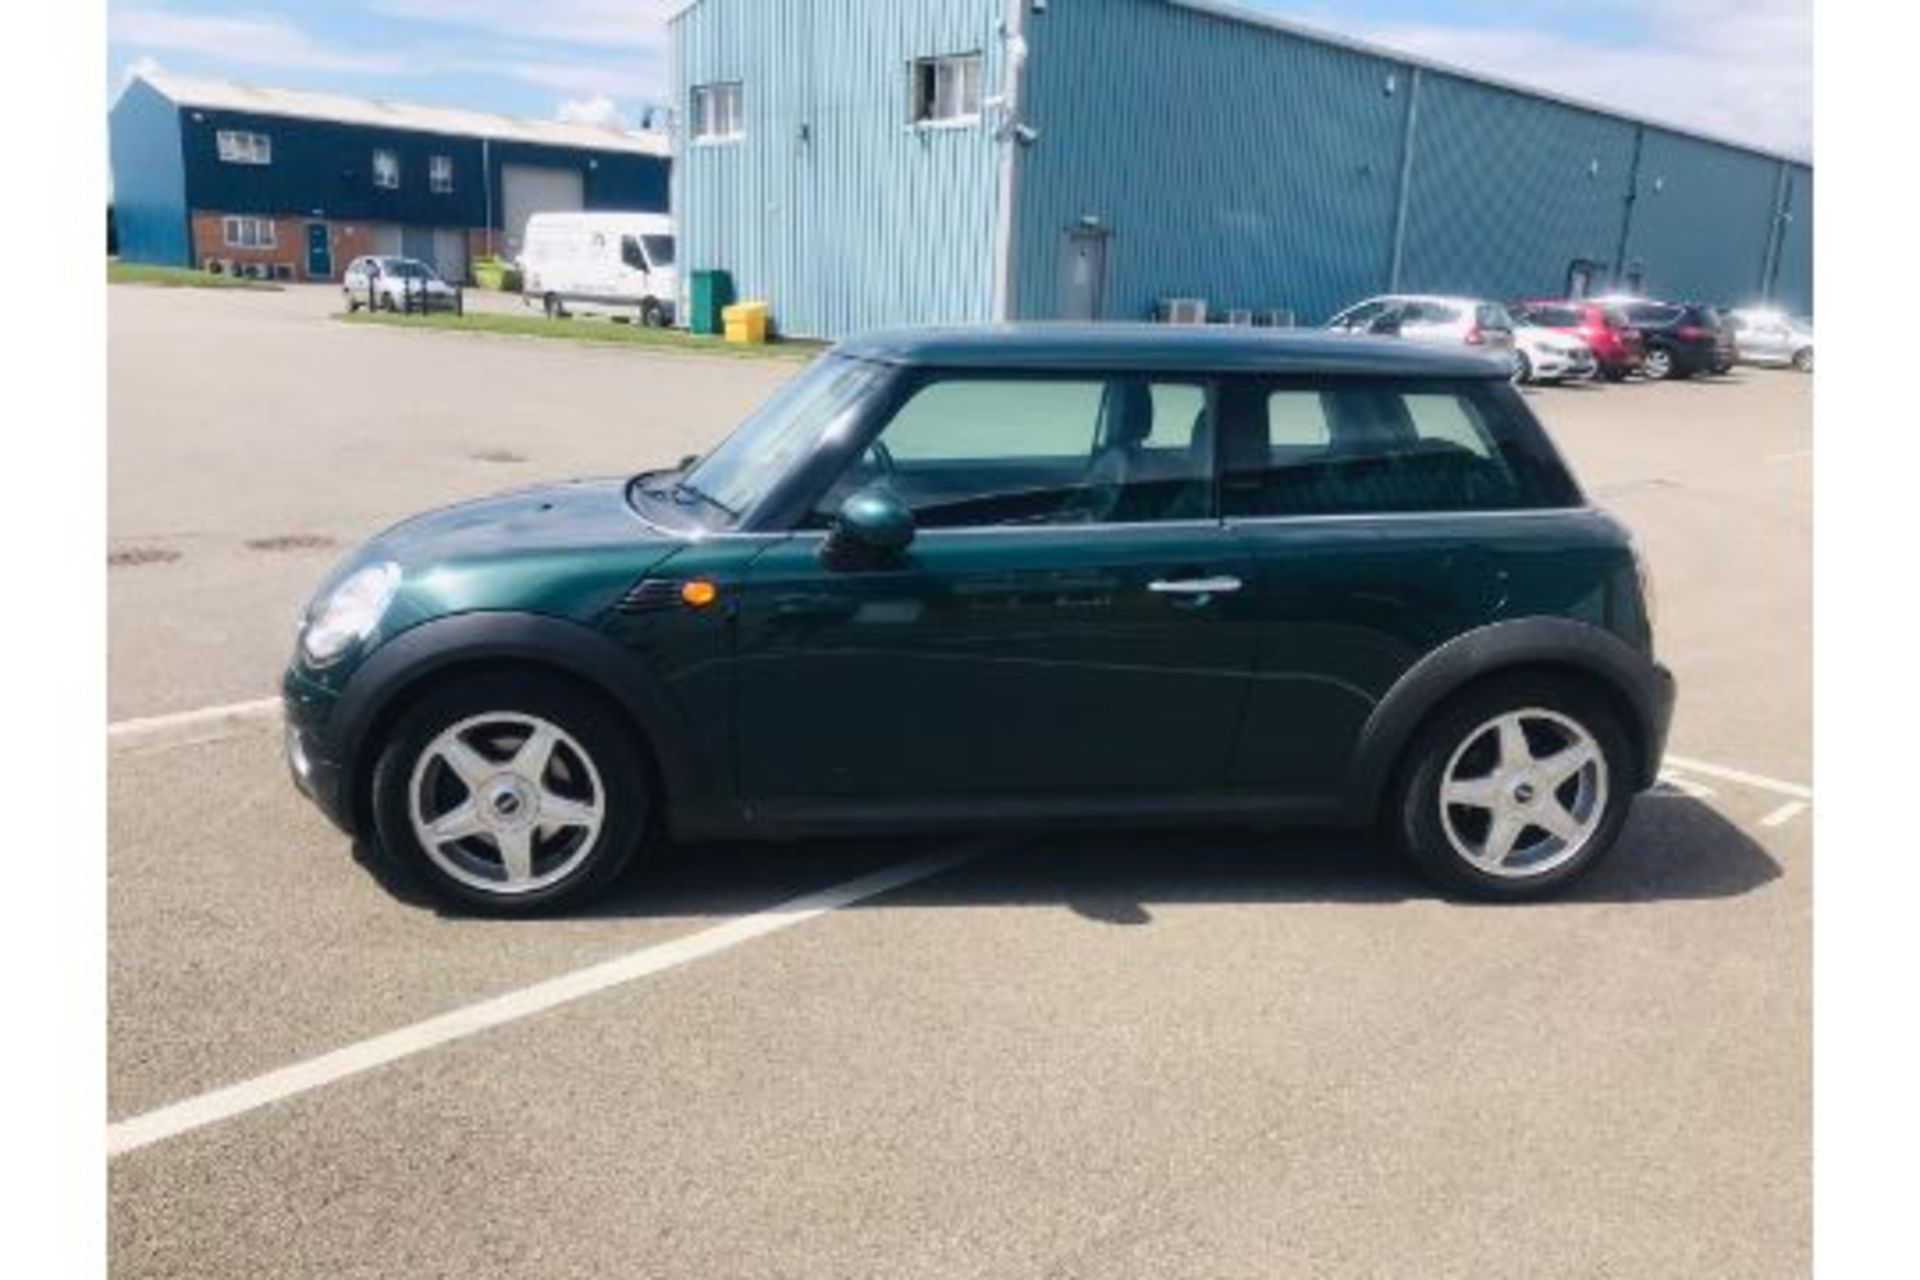 (RESERVE MET) Mini Cooper 1.6 D Hatchback - 2008 Model - Full Leather - Air Con - Heated Screen - - Image 6 of 27